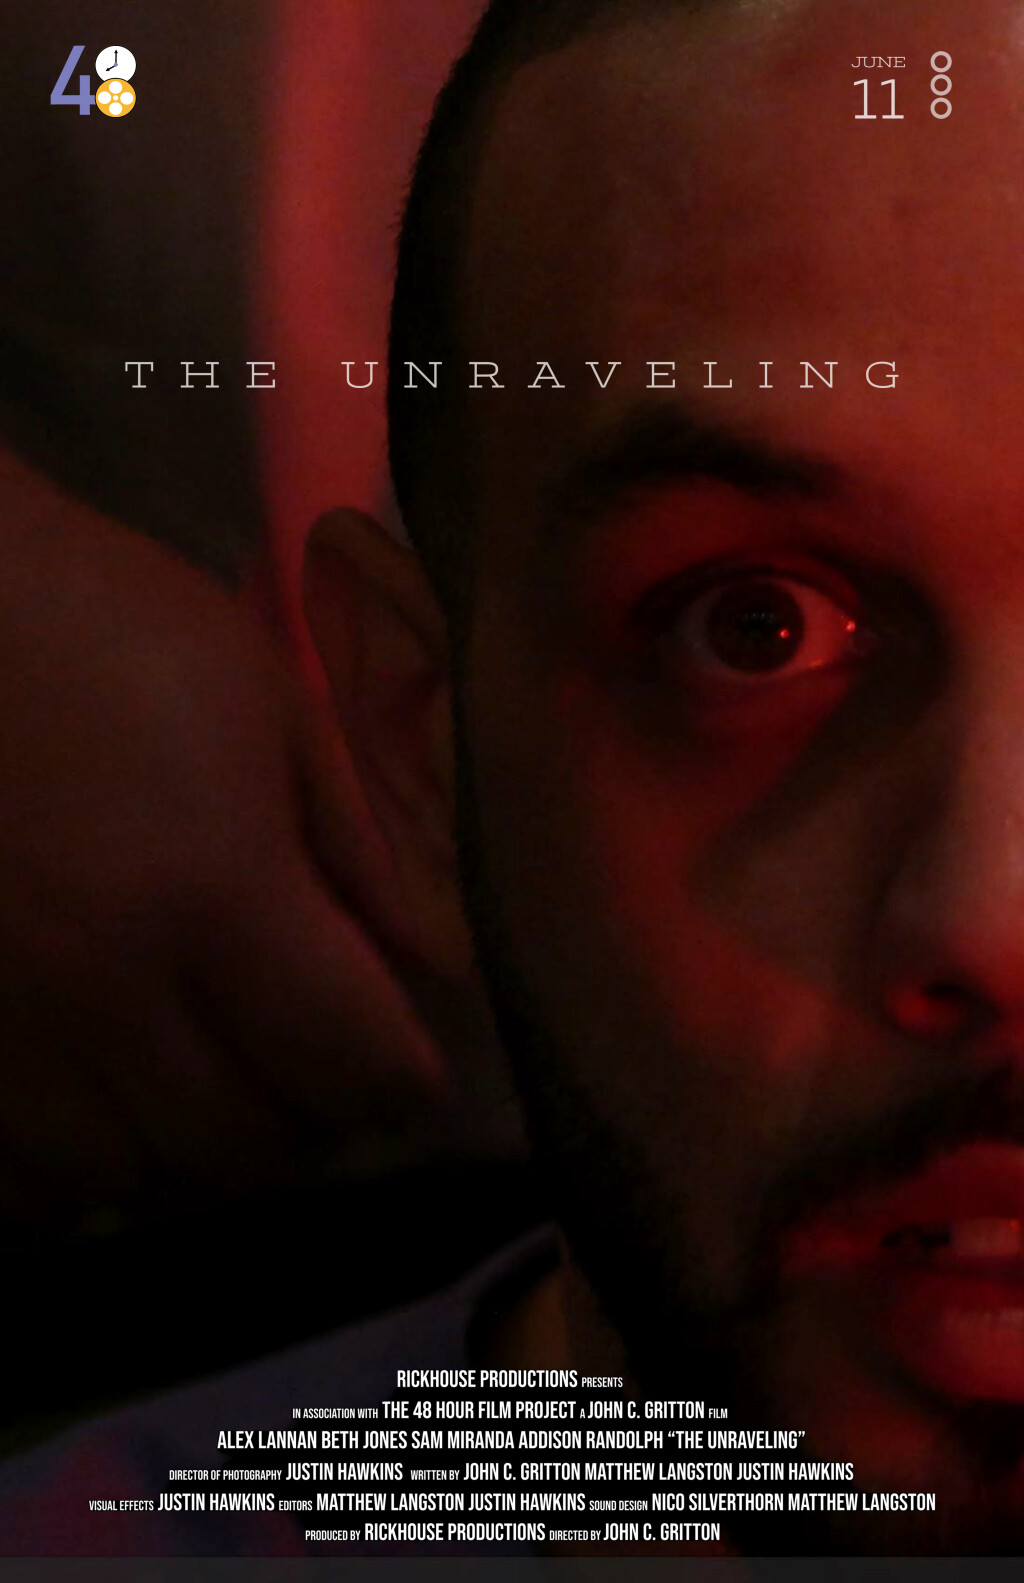 Filmposter for The Unraveling